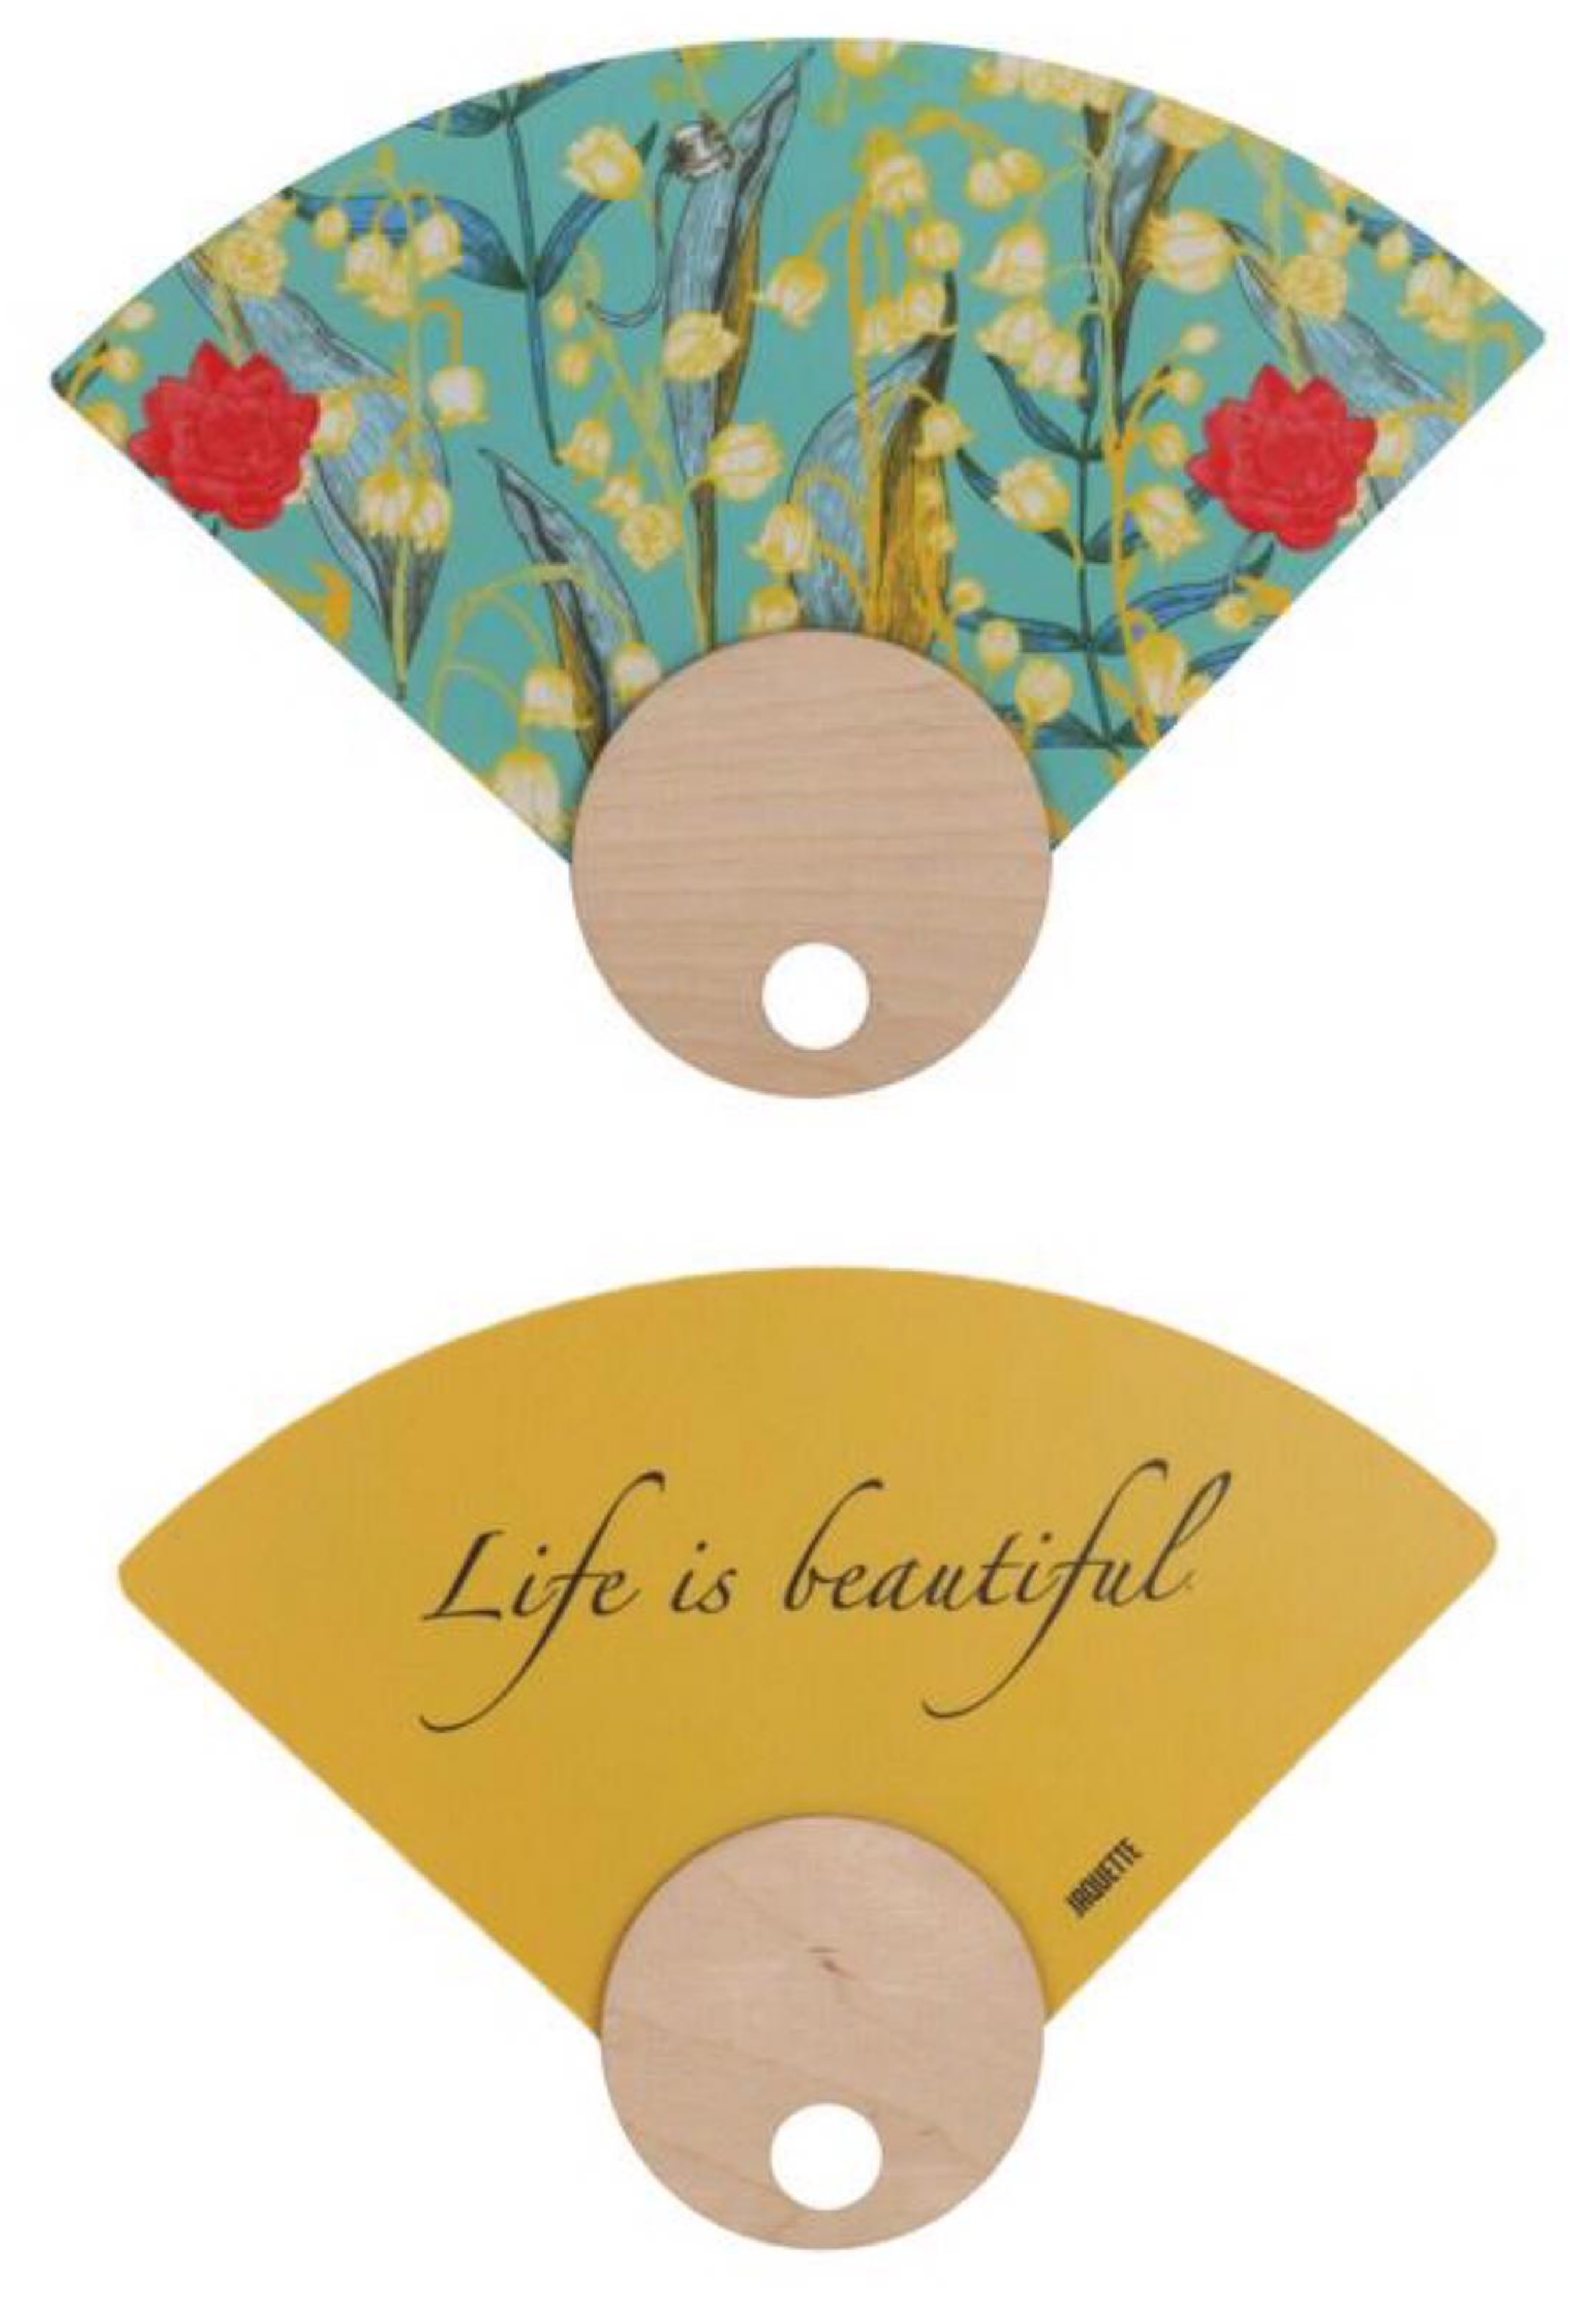 HAND FANS WITH OUR EXCLUSIVE PATTERNS